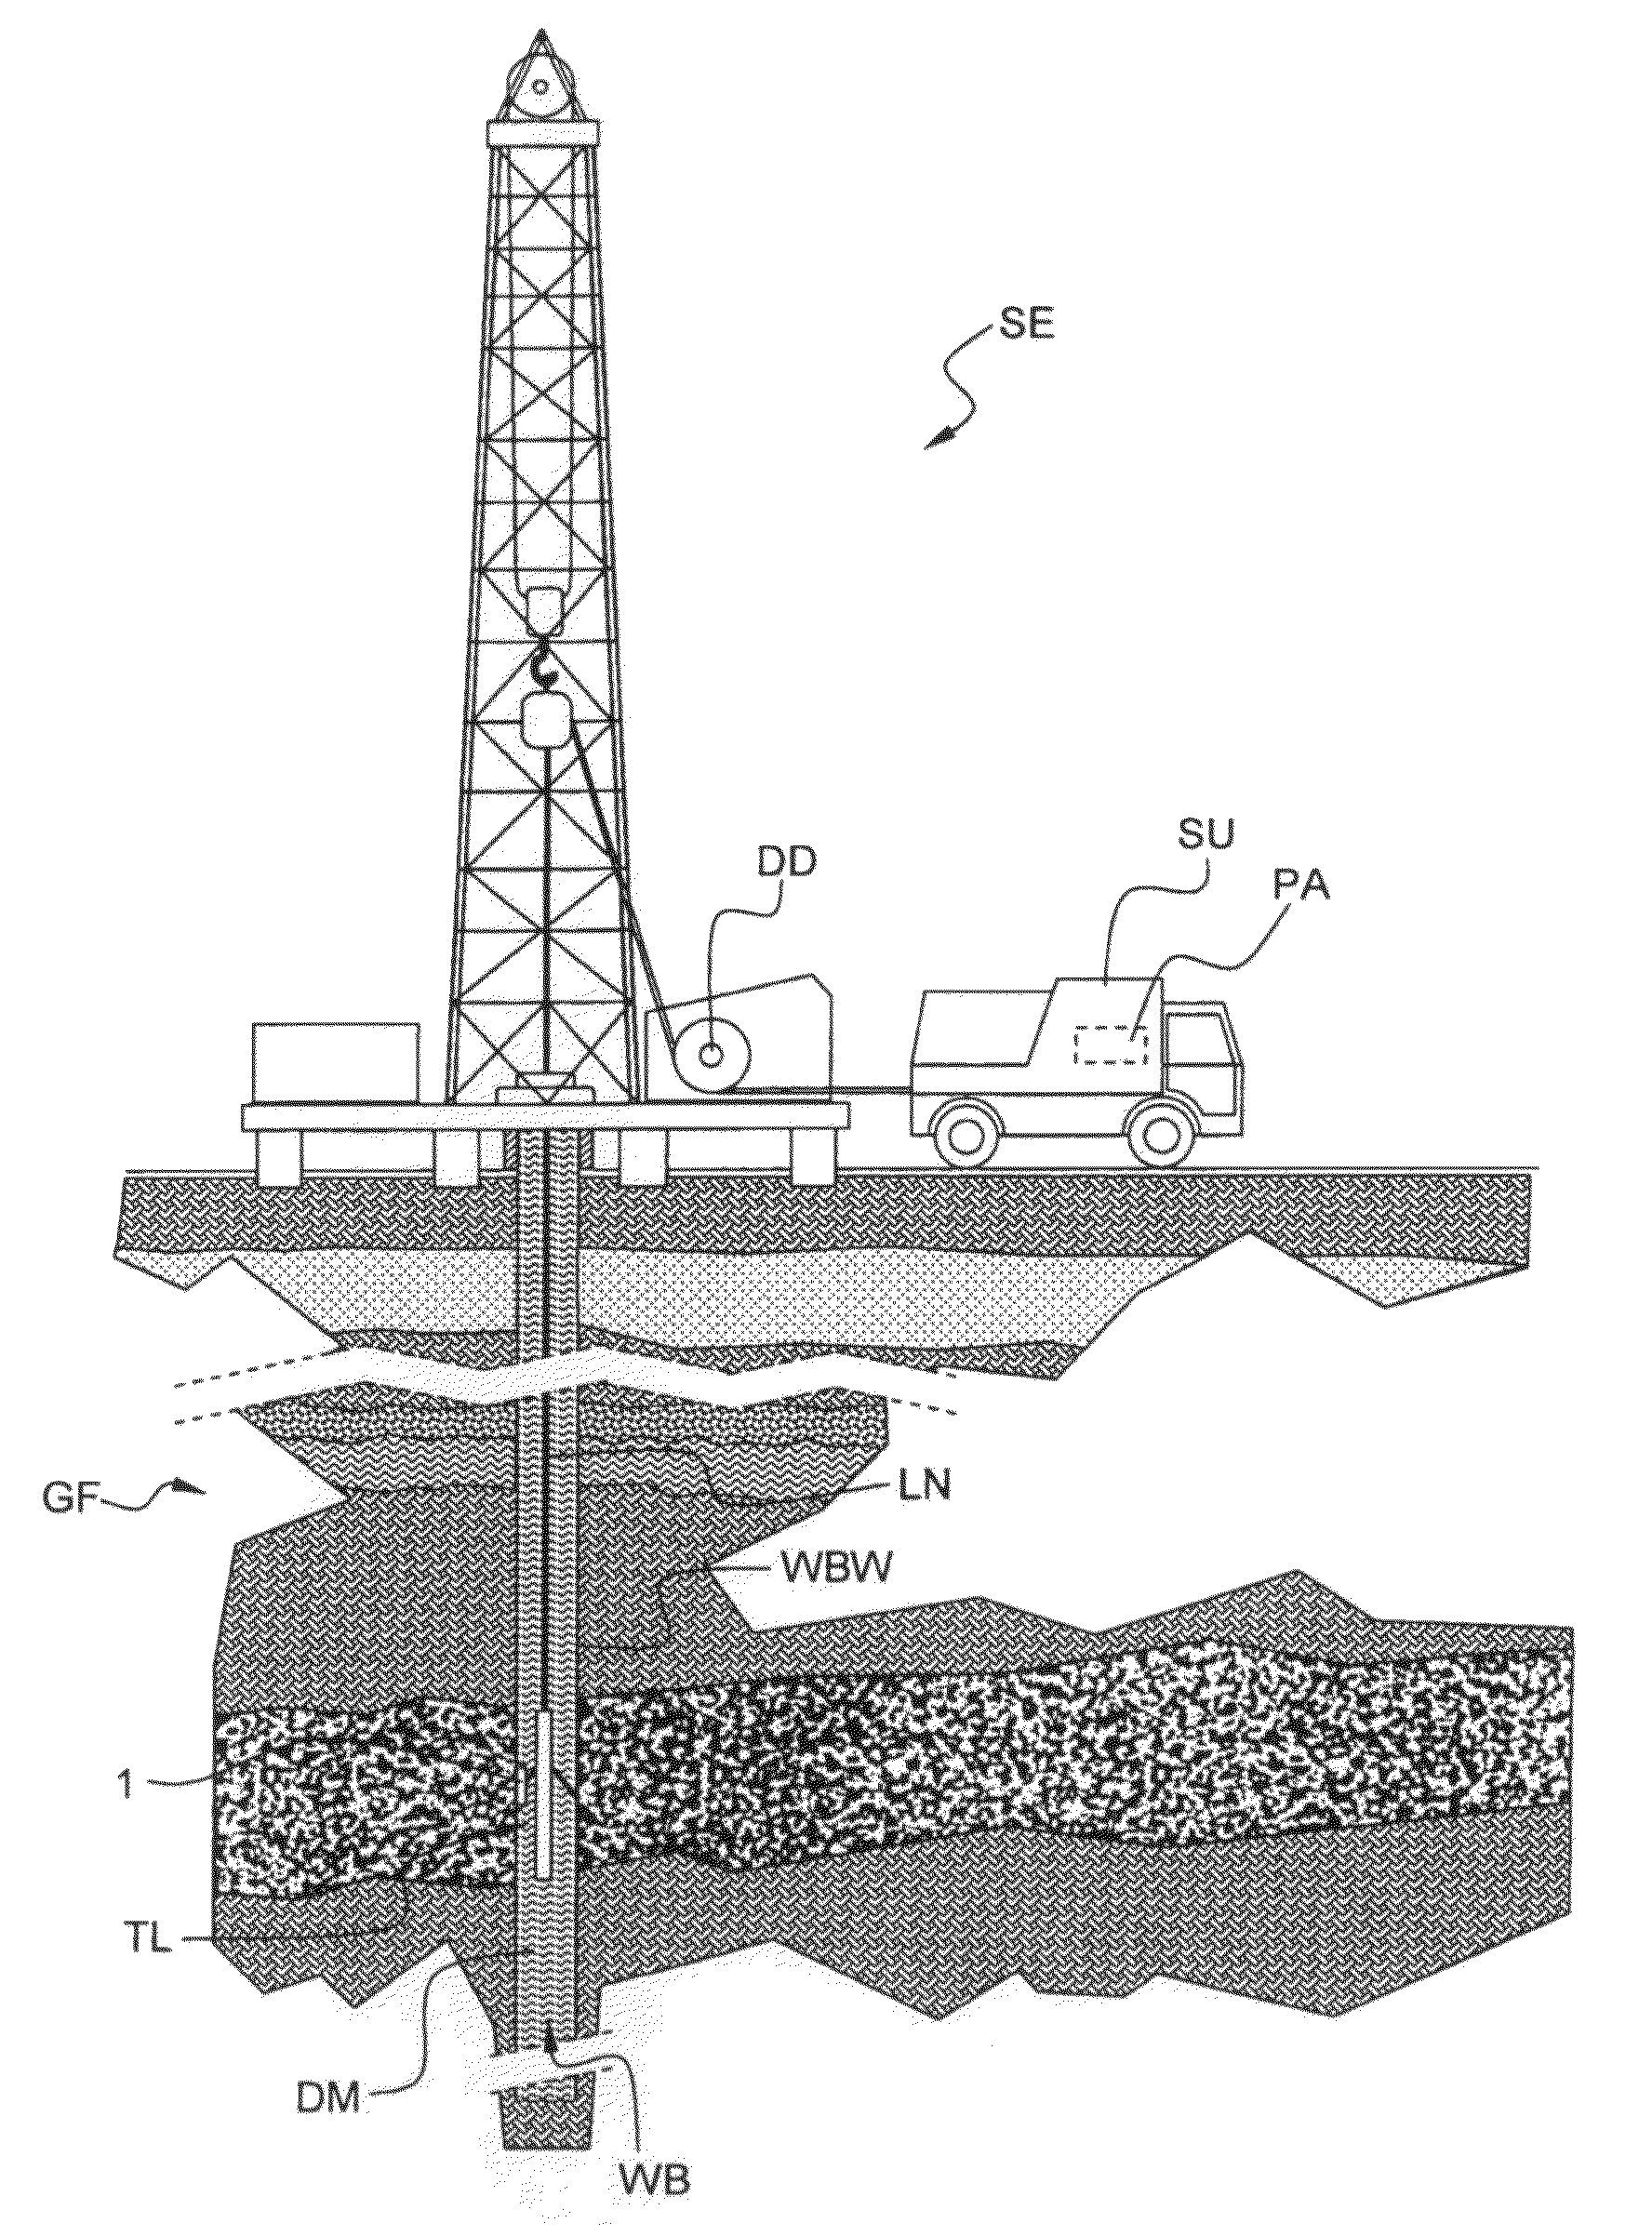 Antenna of an electromagnetic probe for investigating geological formations